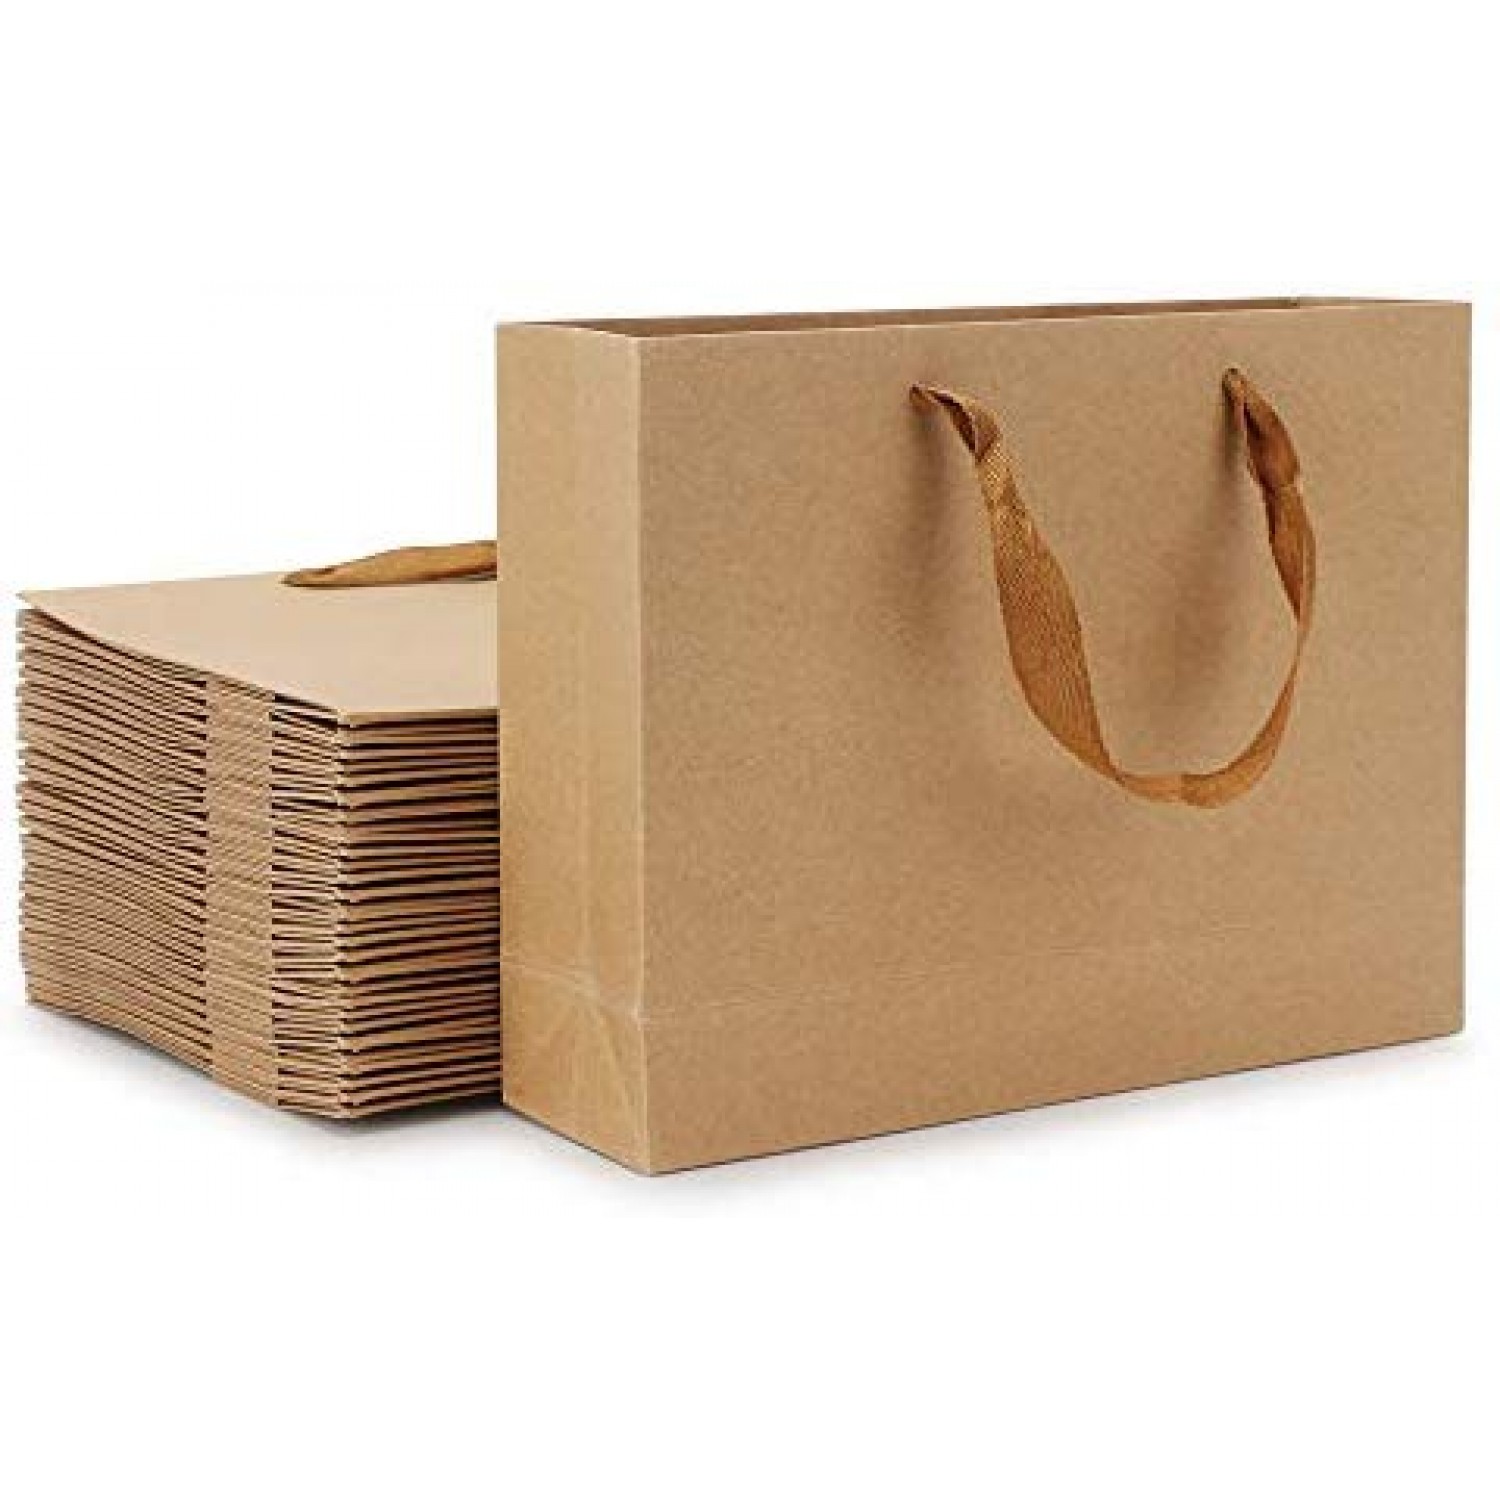 Small Gift Bags Shopping Bags Party Bags Goody Bags Grocery Bags Recyclable for Birthday Takeouts Poever Black Paper Bags with Handles 5.25x3.75x8 Kraft Paper Bags 50 PCS 